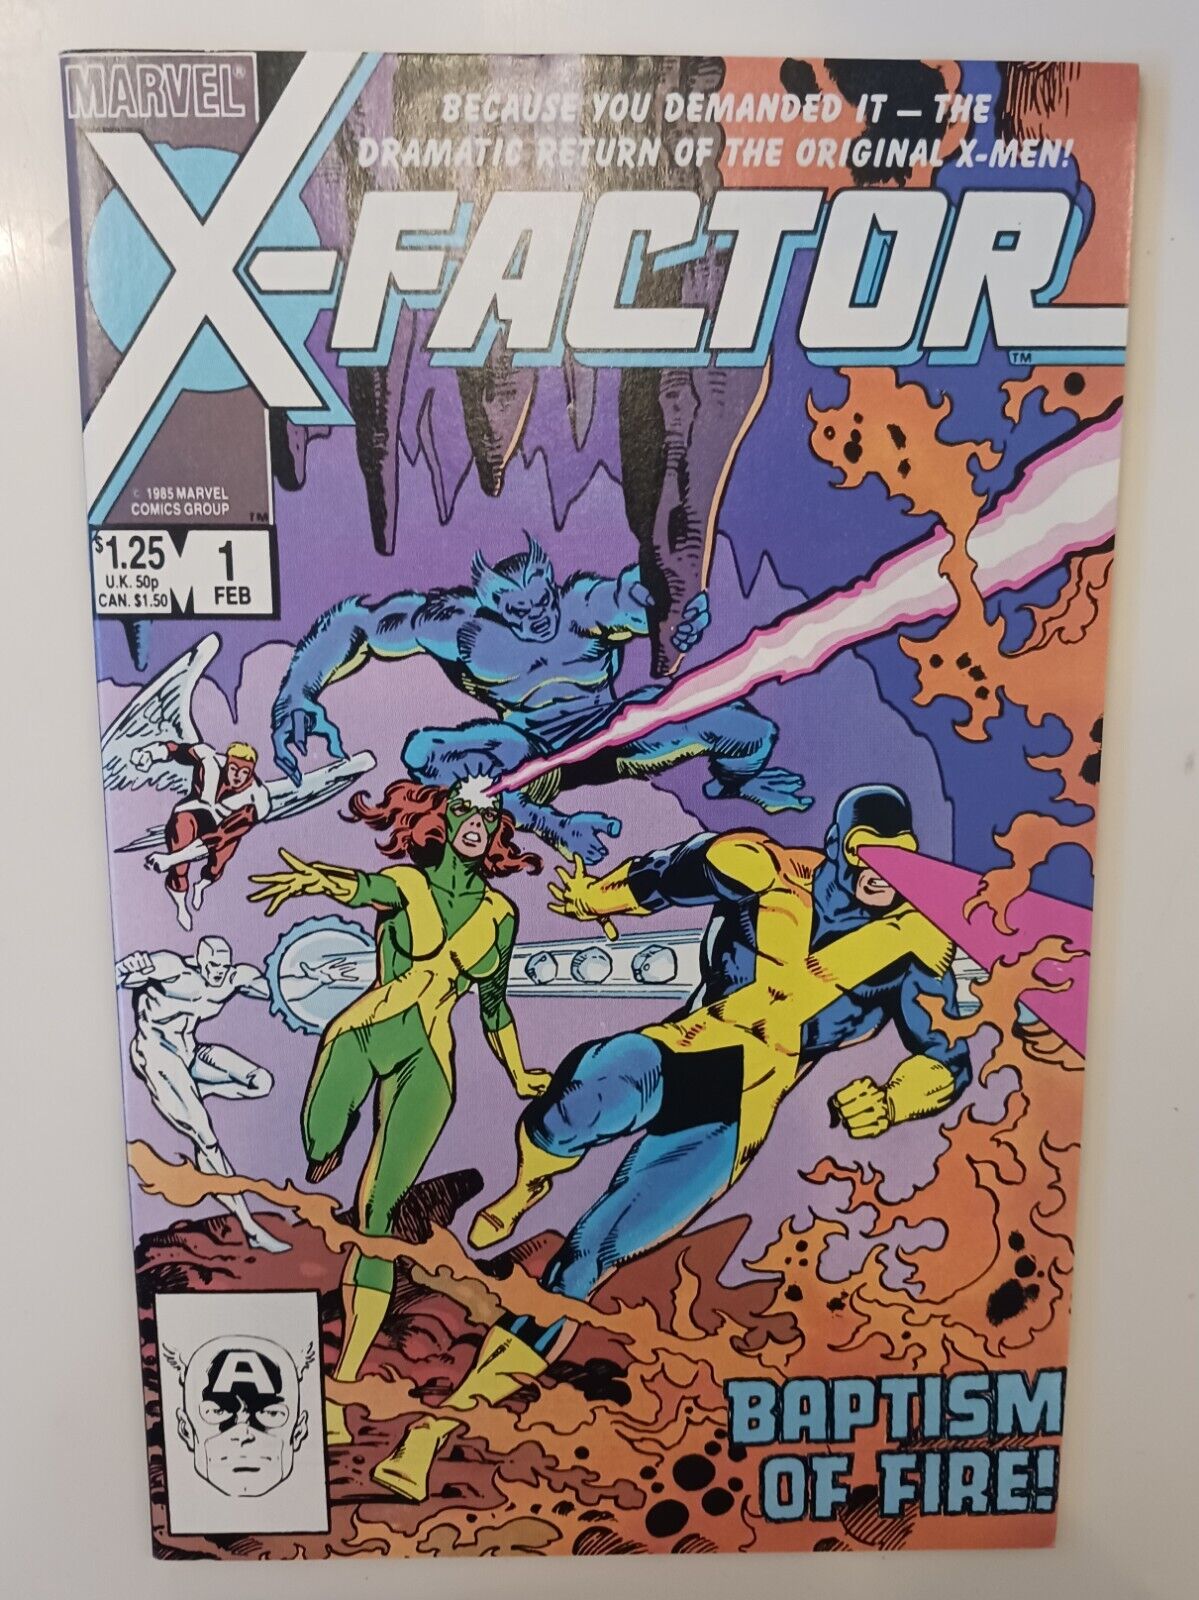 X-Factor #1 (Marvel Comics February 1986) Clean Edges And White Pages